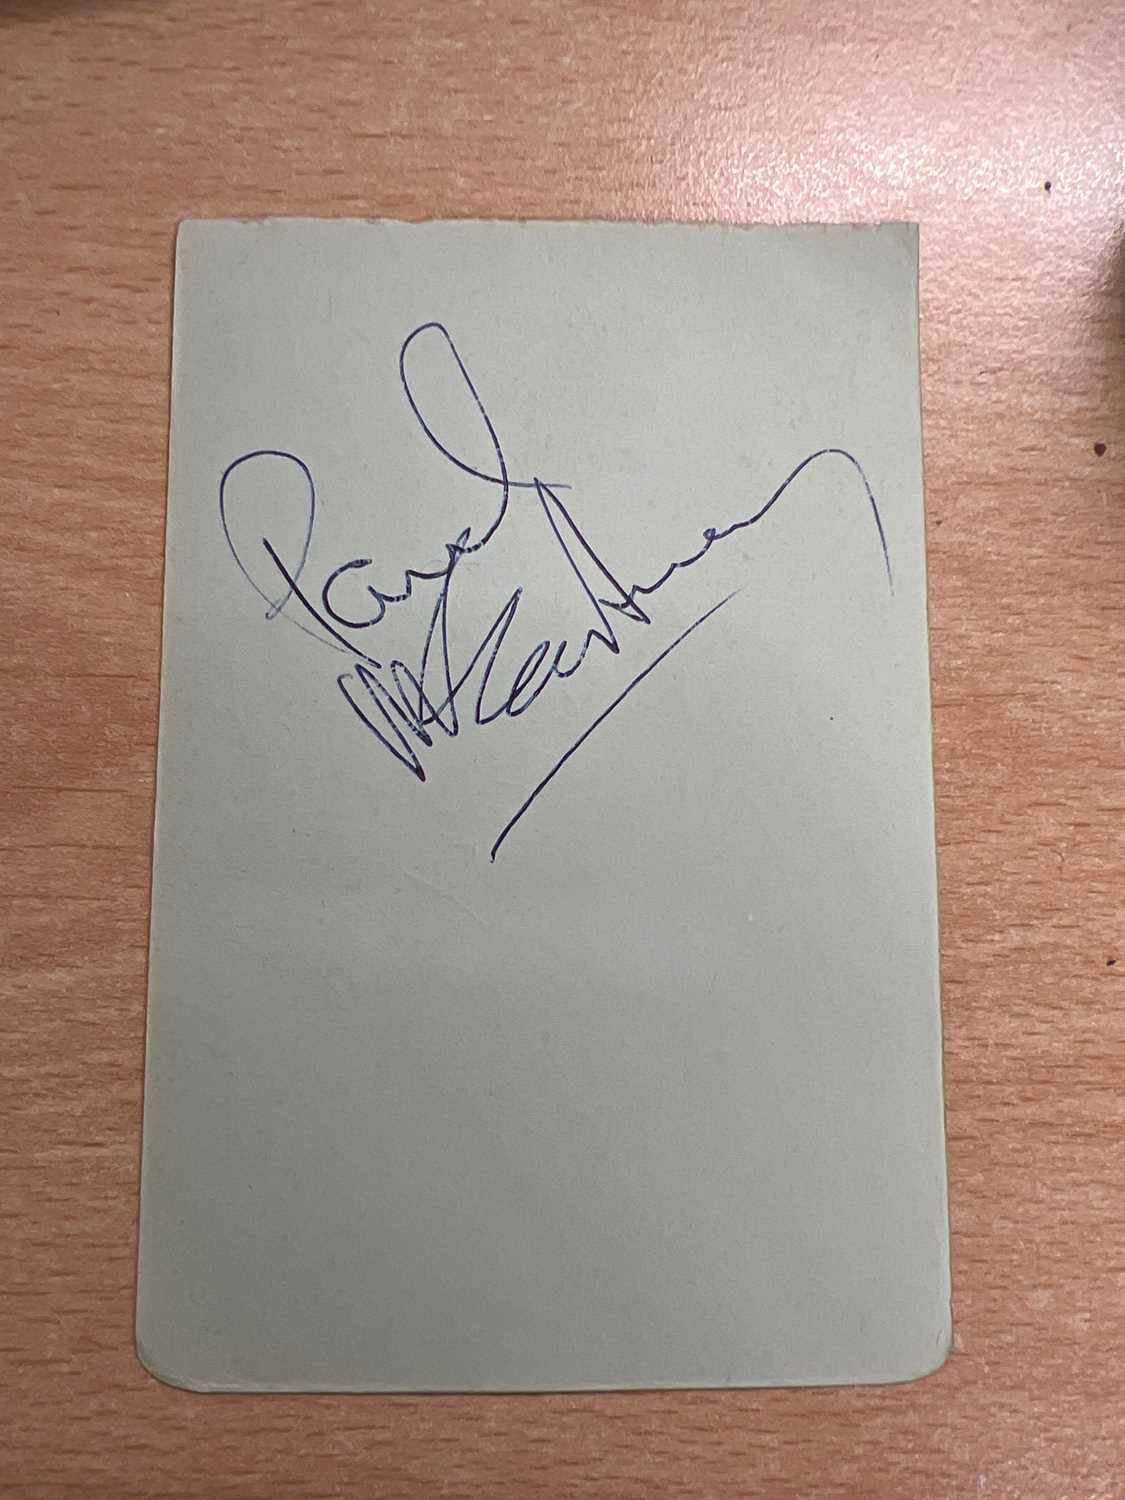 The Beatles: autographs, - Image 3 of 3